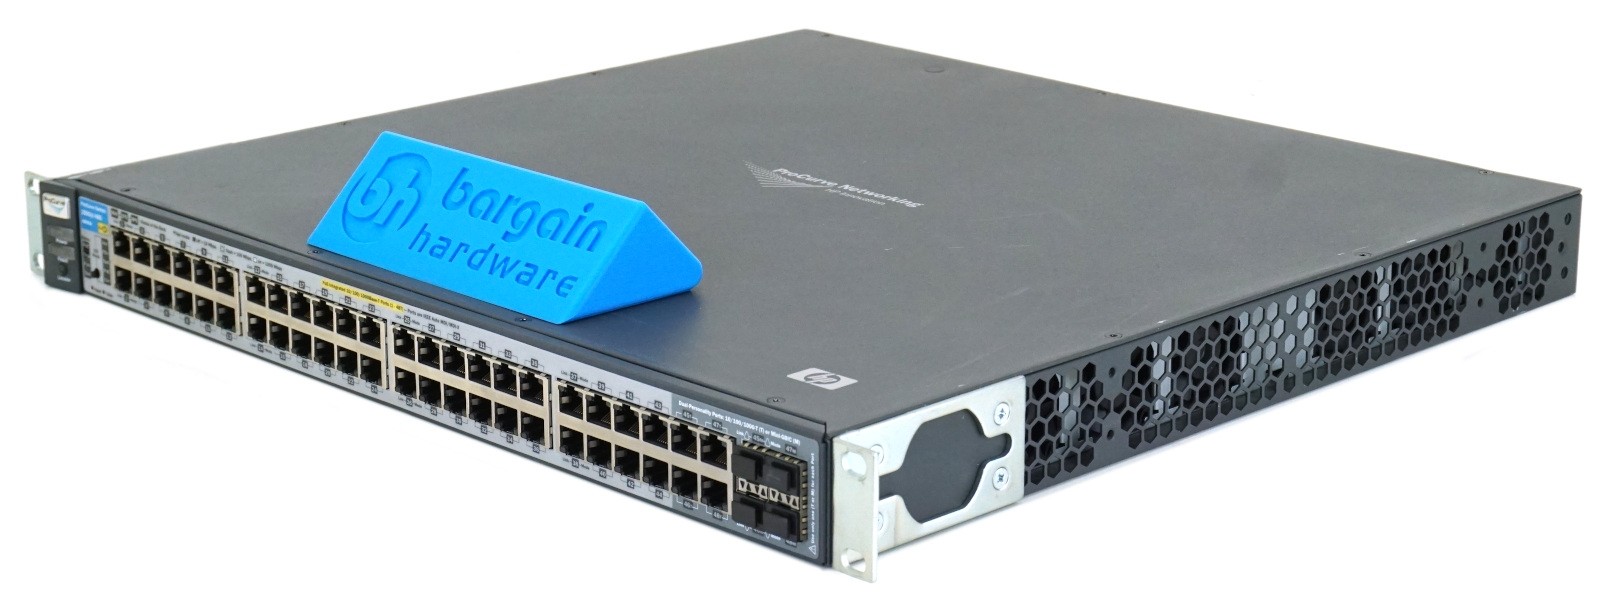 HP (J8693A) Pro-Curve 3500YL-48G-PoE - 48 RJ-45 Port PoE Switch - With Ears